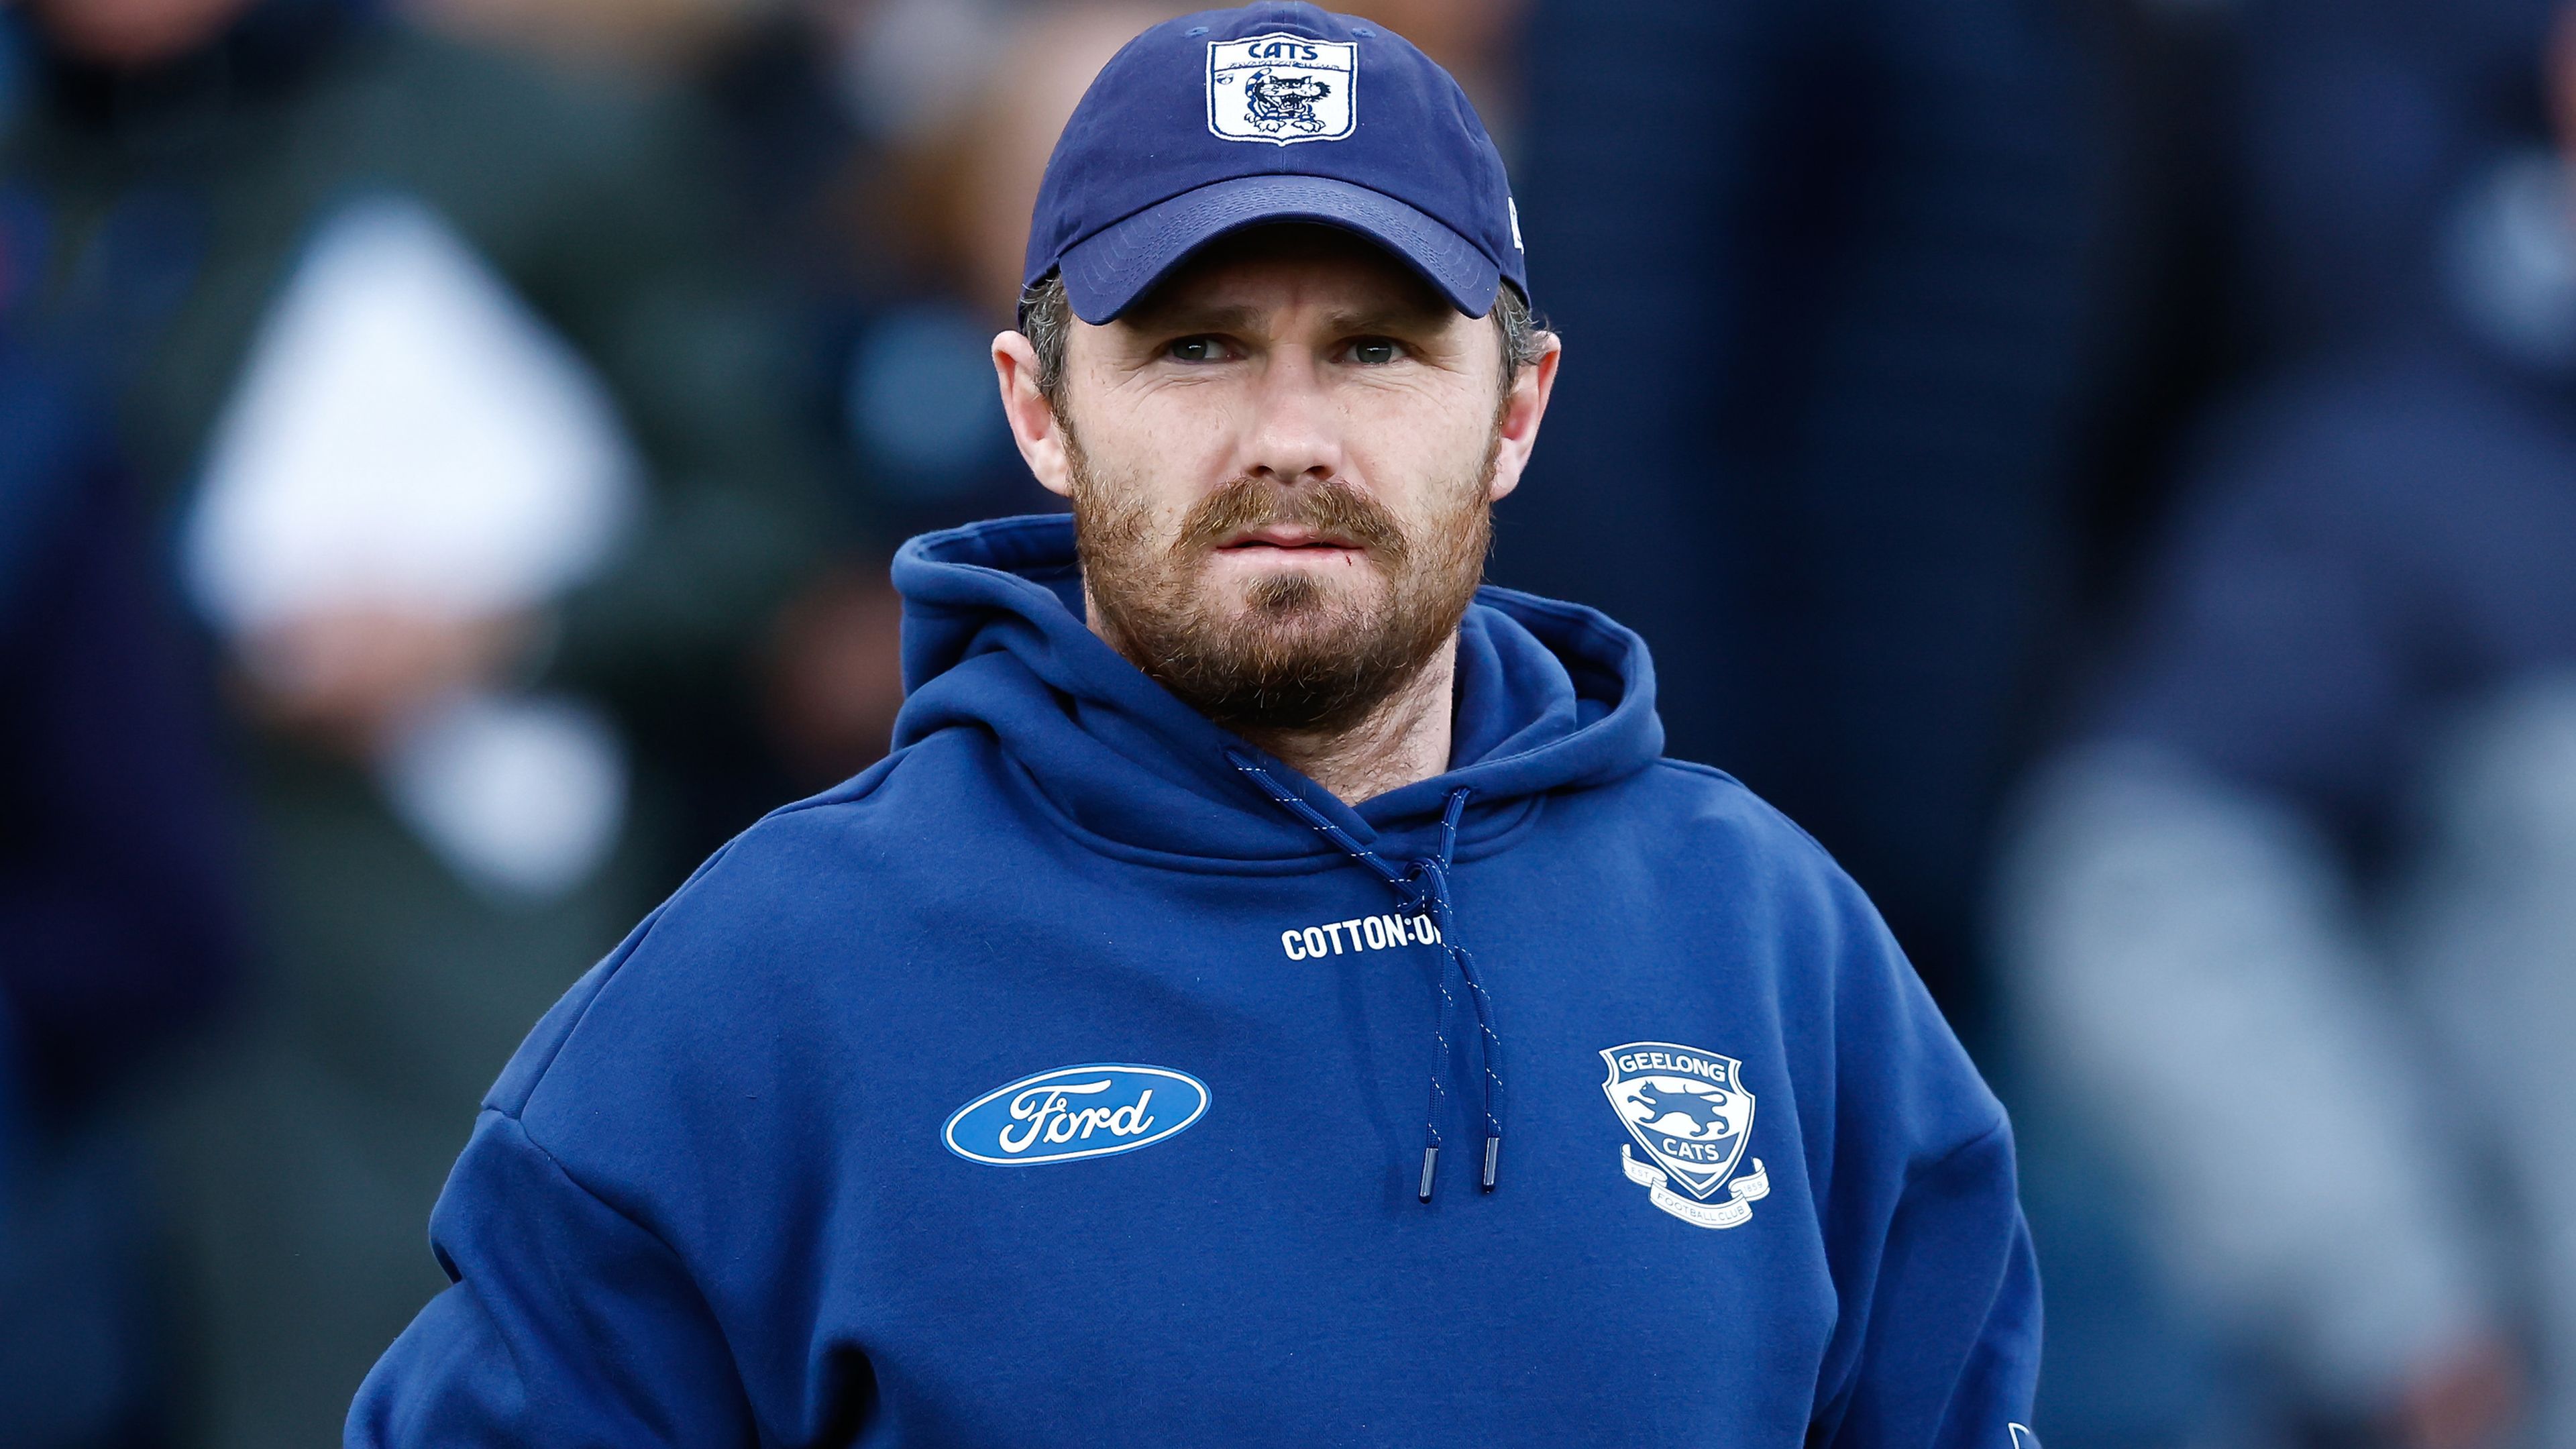 Geelong's fifth straight win soured by fresh Patrick Dangerfield injury scare